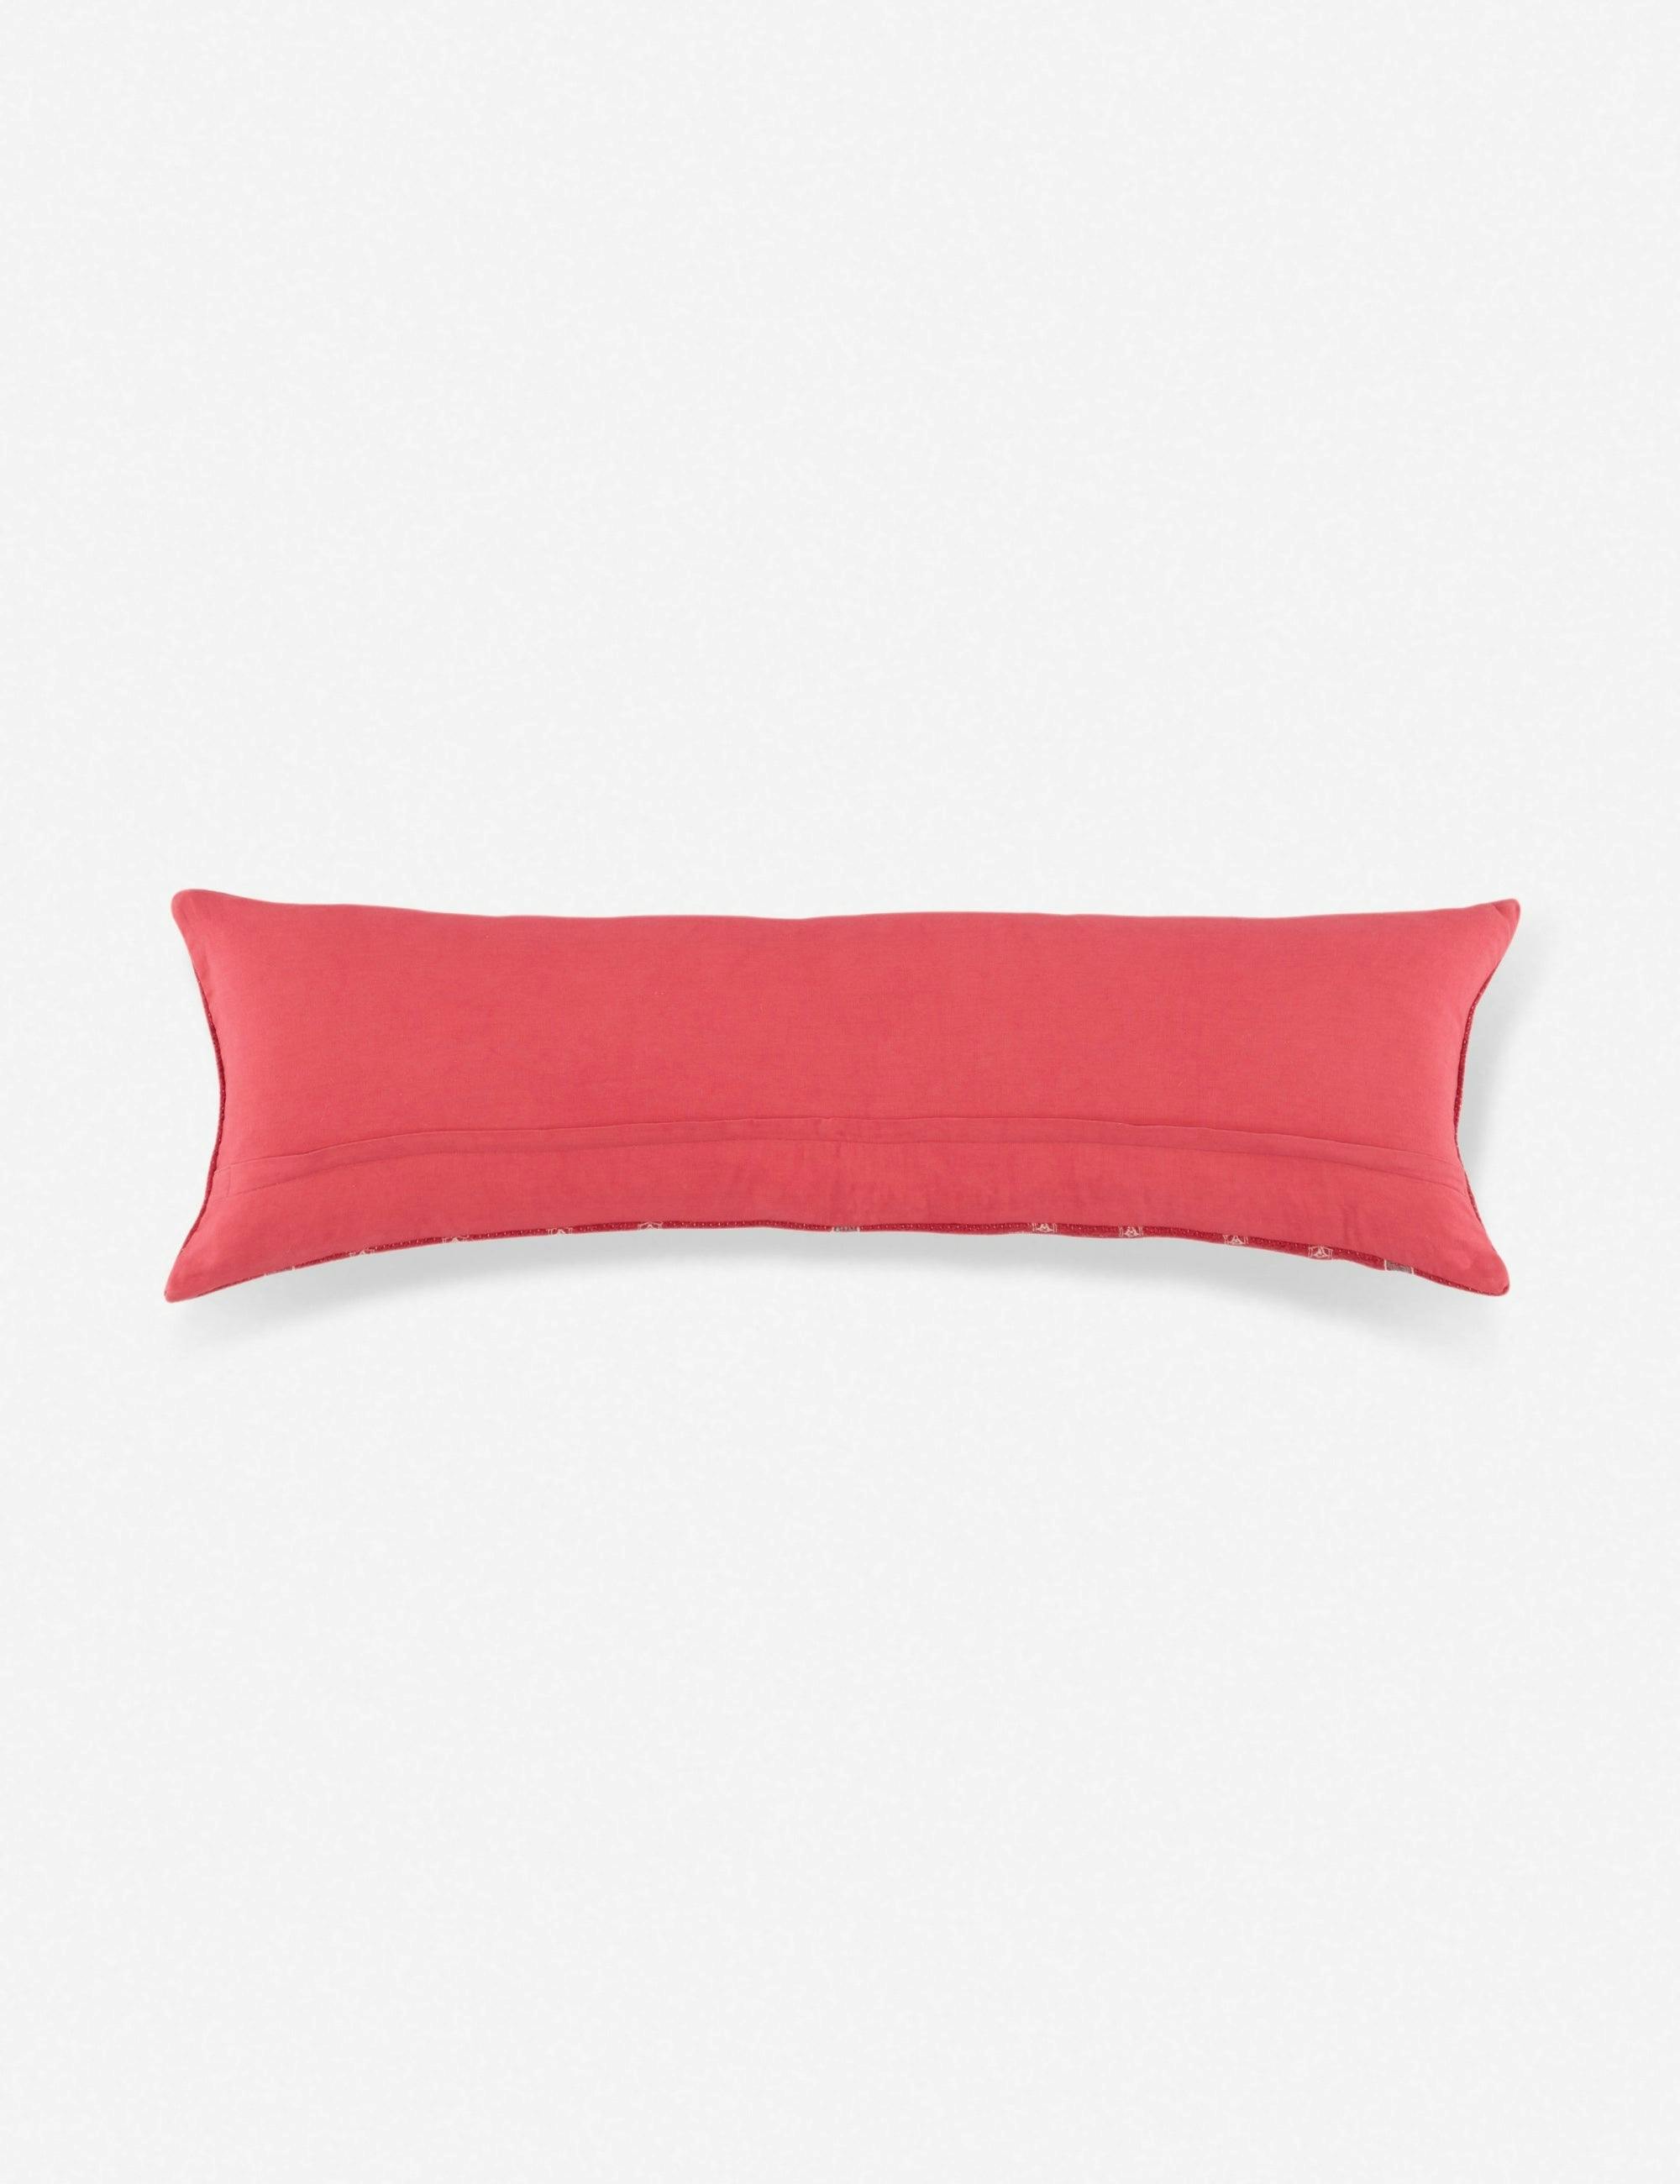 Folk-Inspired Red and Gray Woven Cotton Lumbar Pillow - 48"